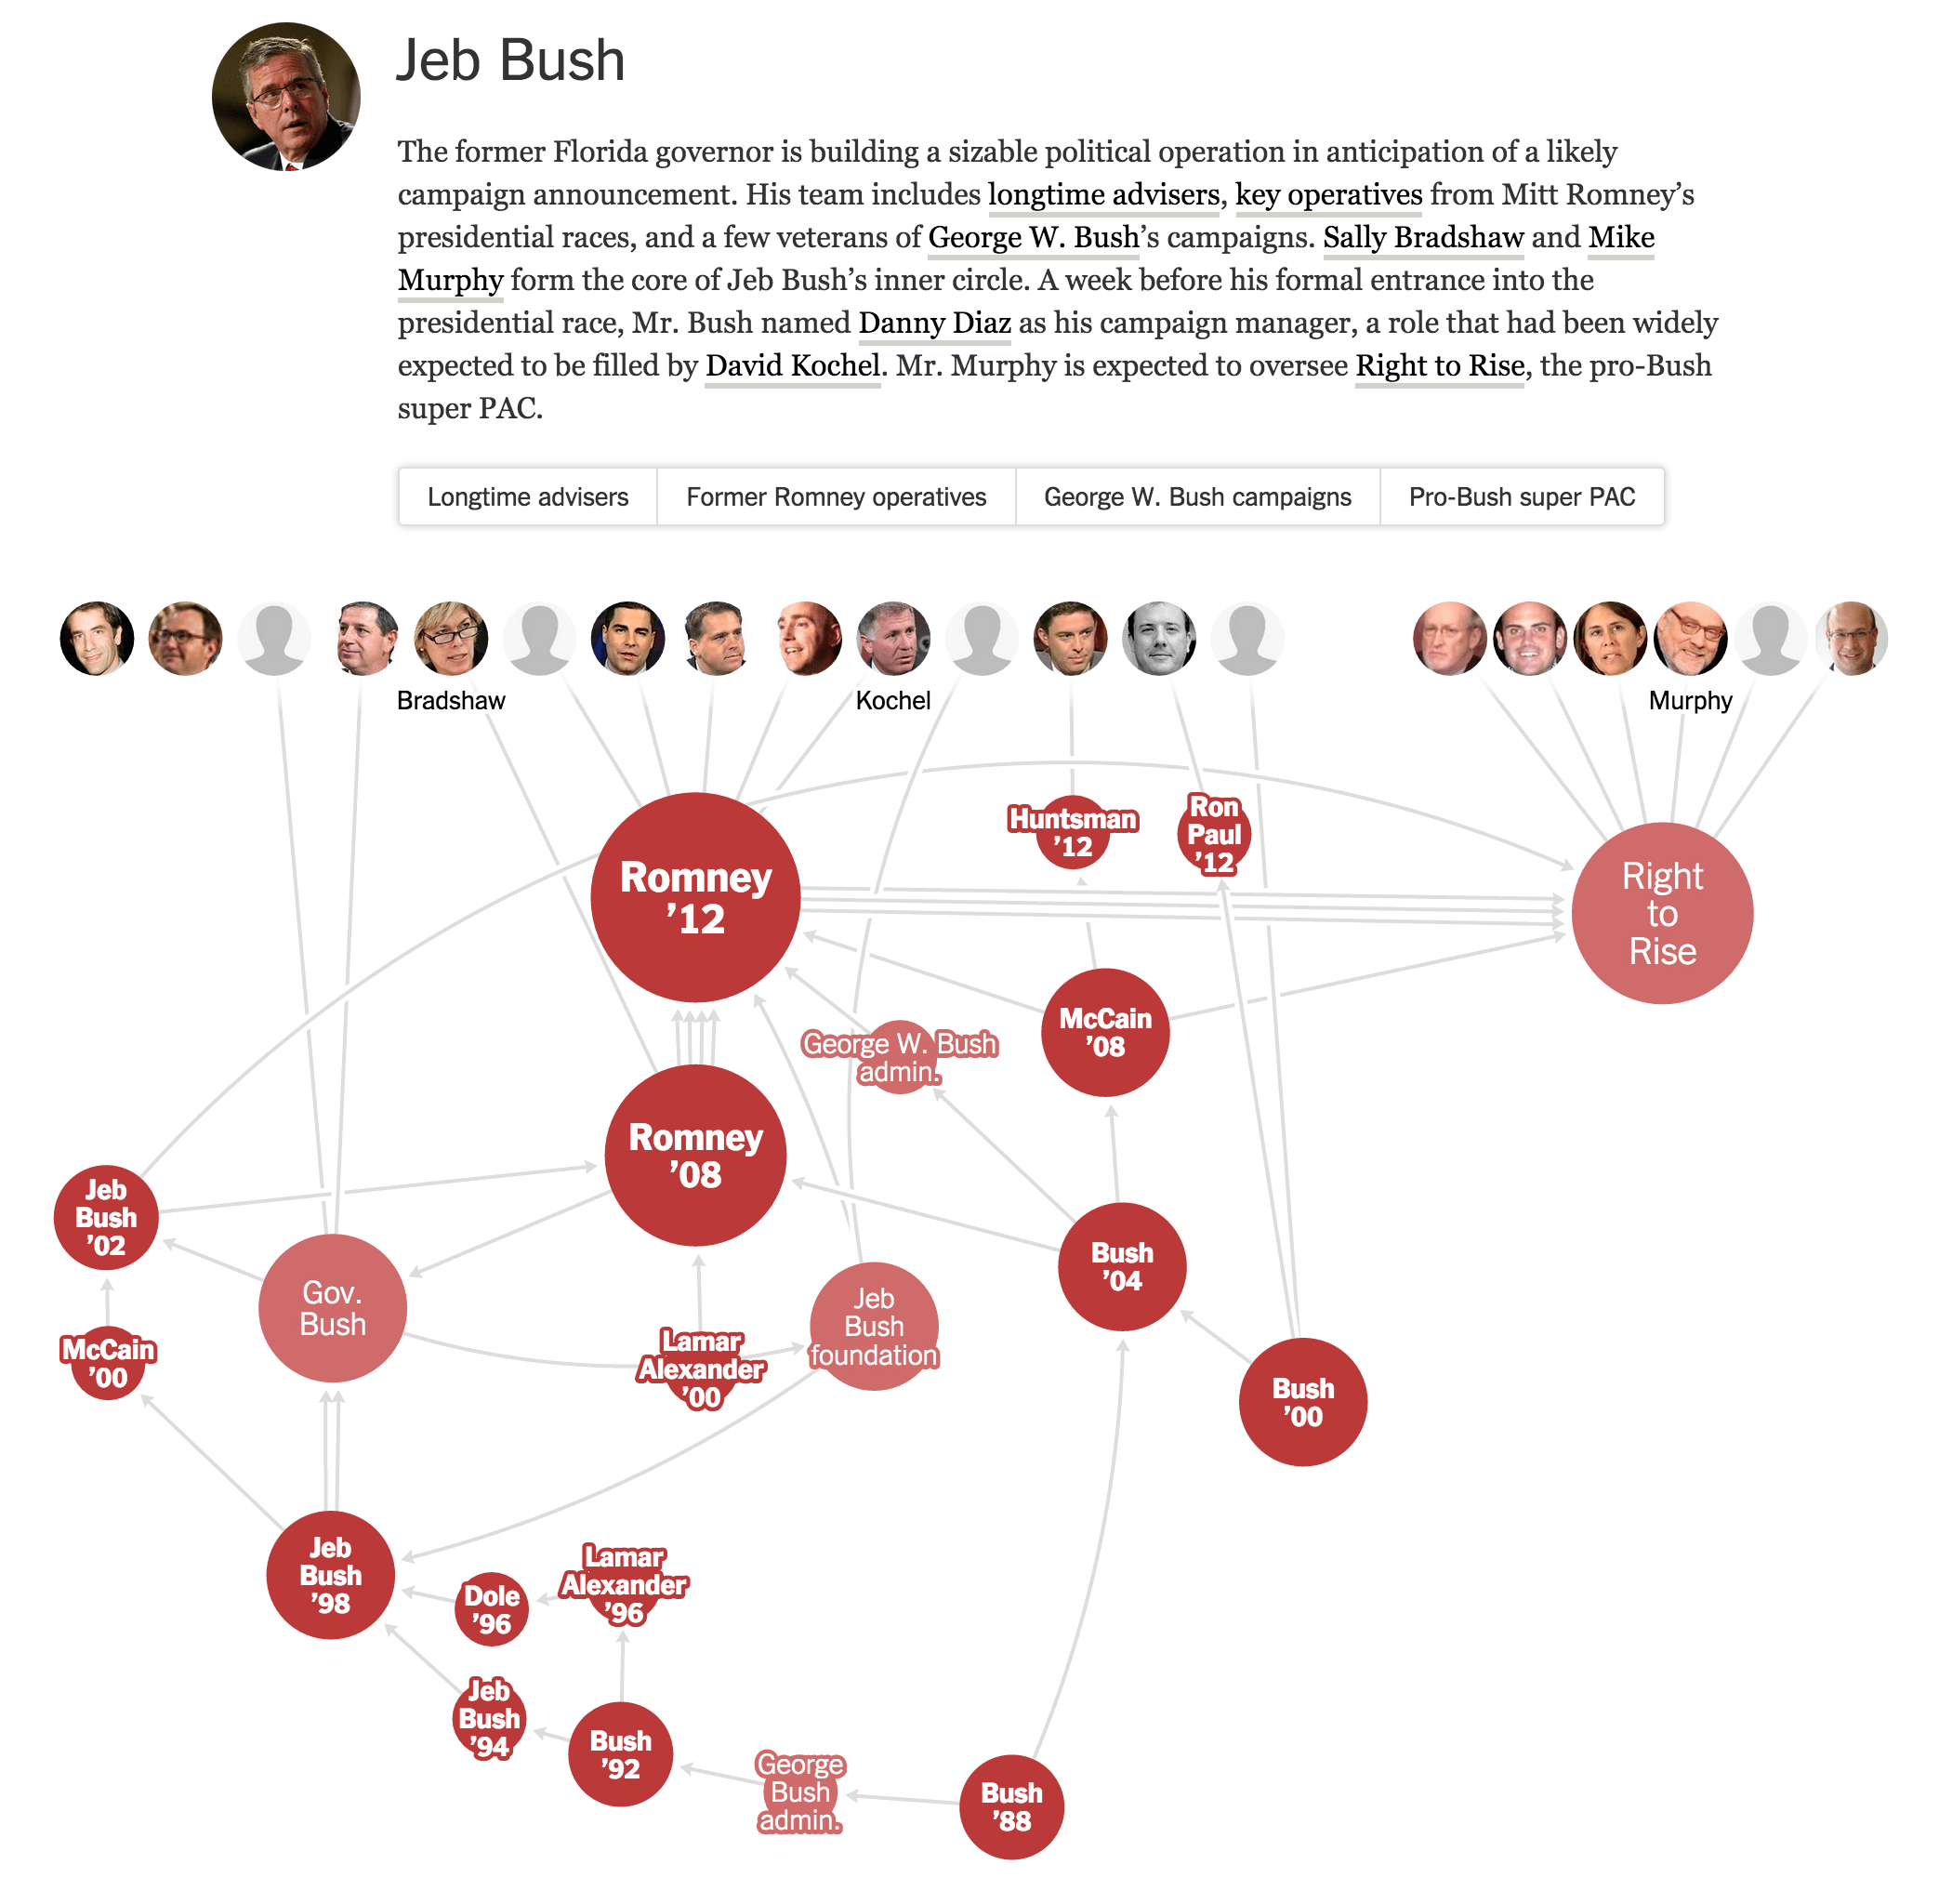 Connecting the Dots Behind the 2016 Presidential Candidates